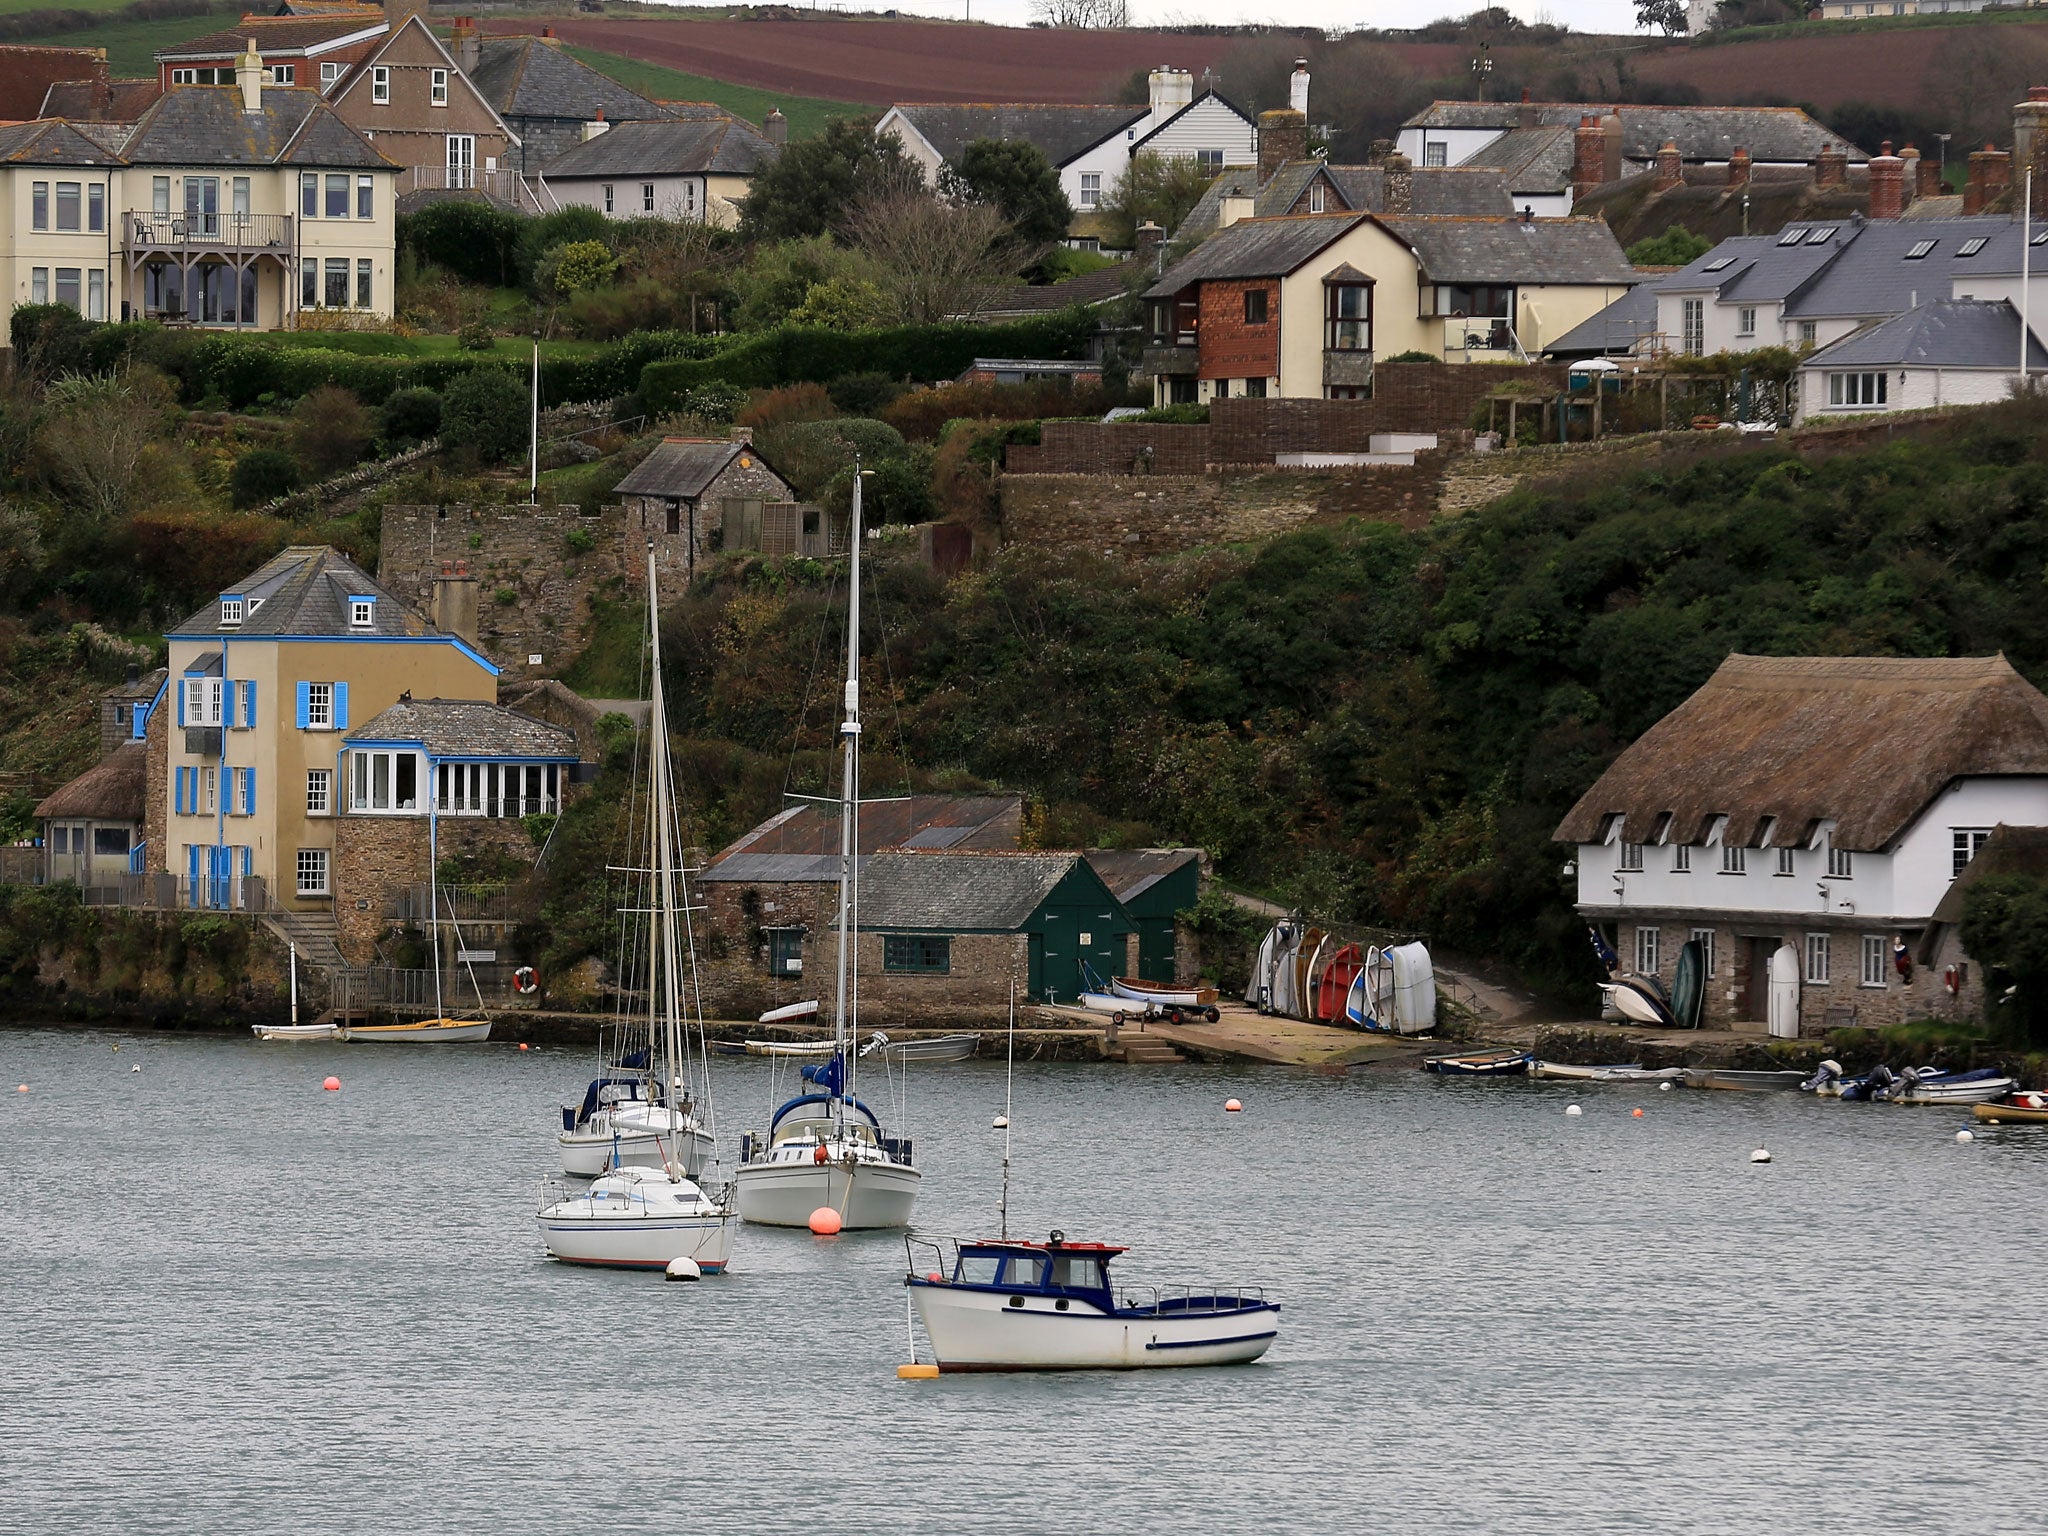 A general view of the picturesque seaside village of Bantham on November 13, 2013 in Devon, England